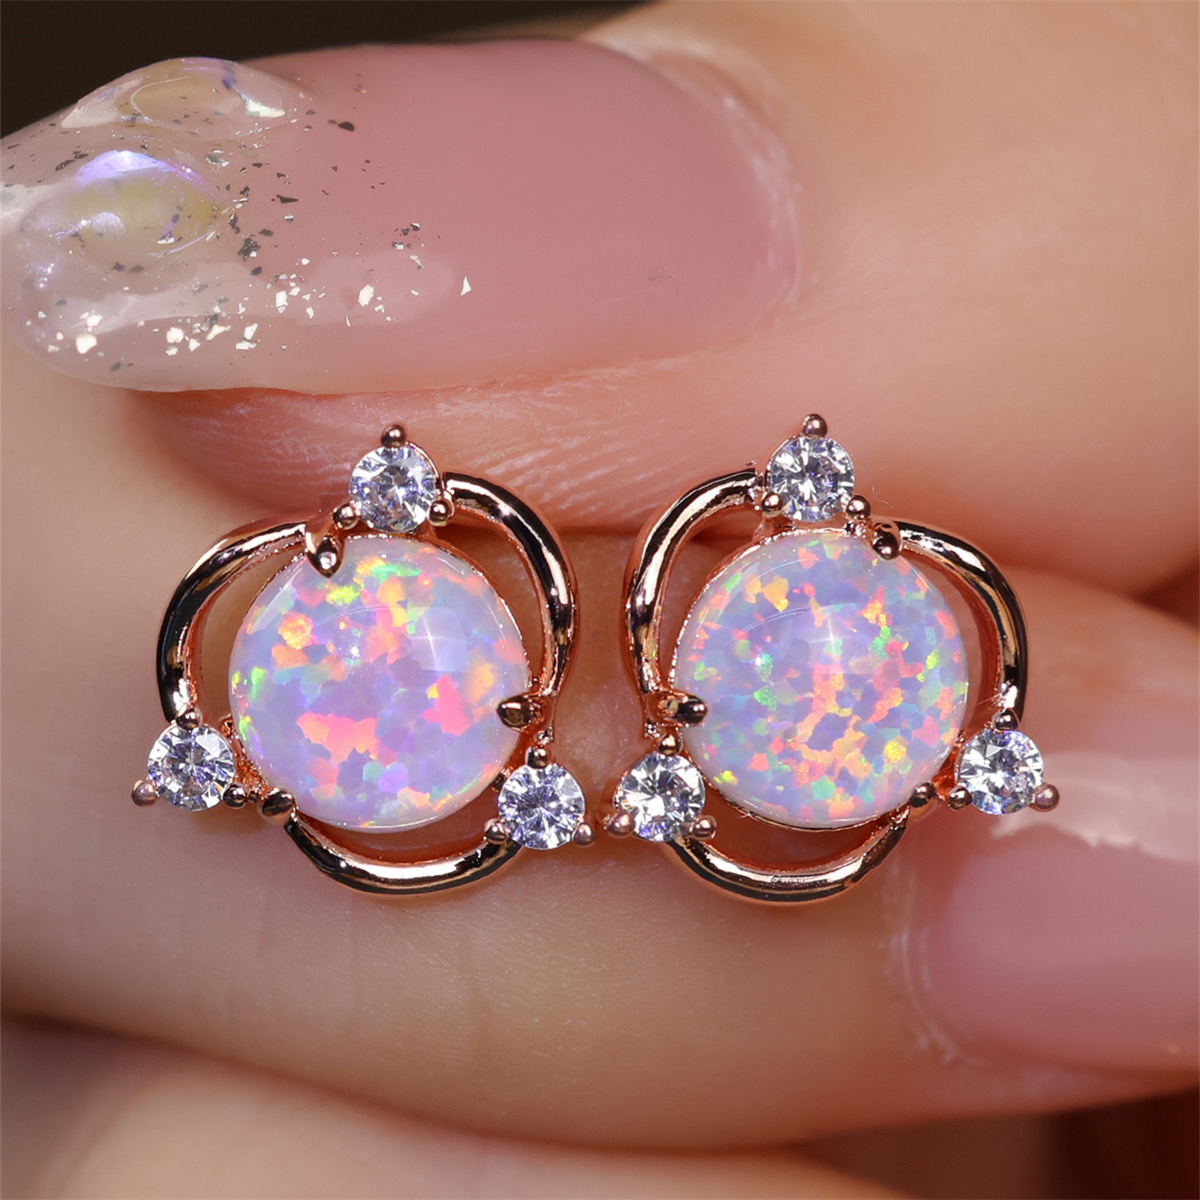 

Exquisite Stud Earrings Copper Jewelry Embellished With Opal With Tiny Flower Design Elegant Vintage Style Valentine's Day Gift